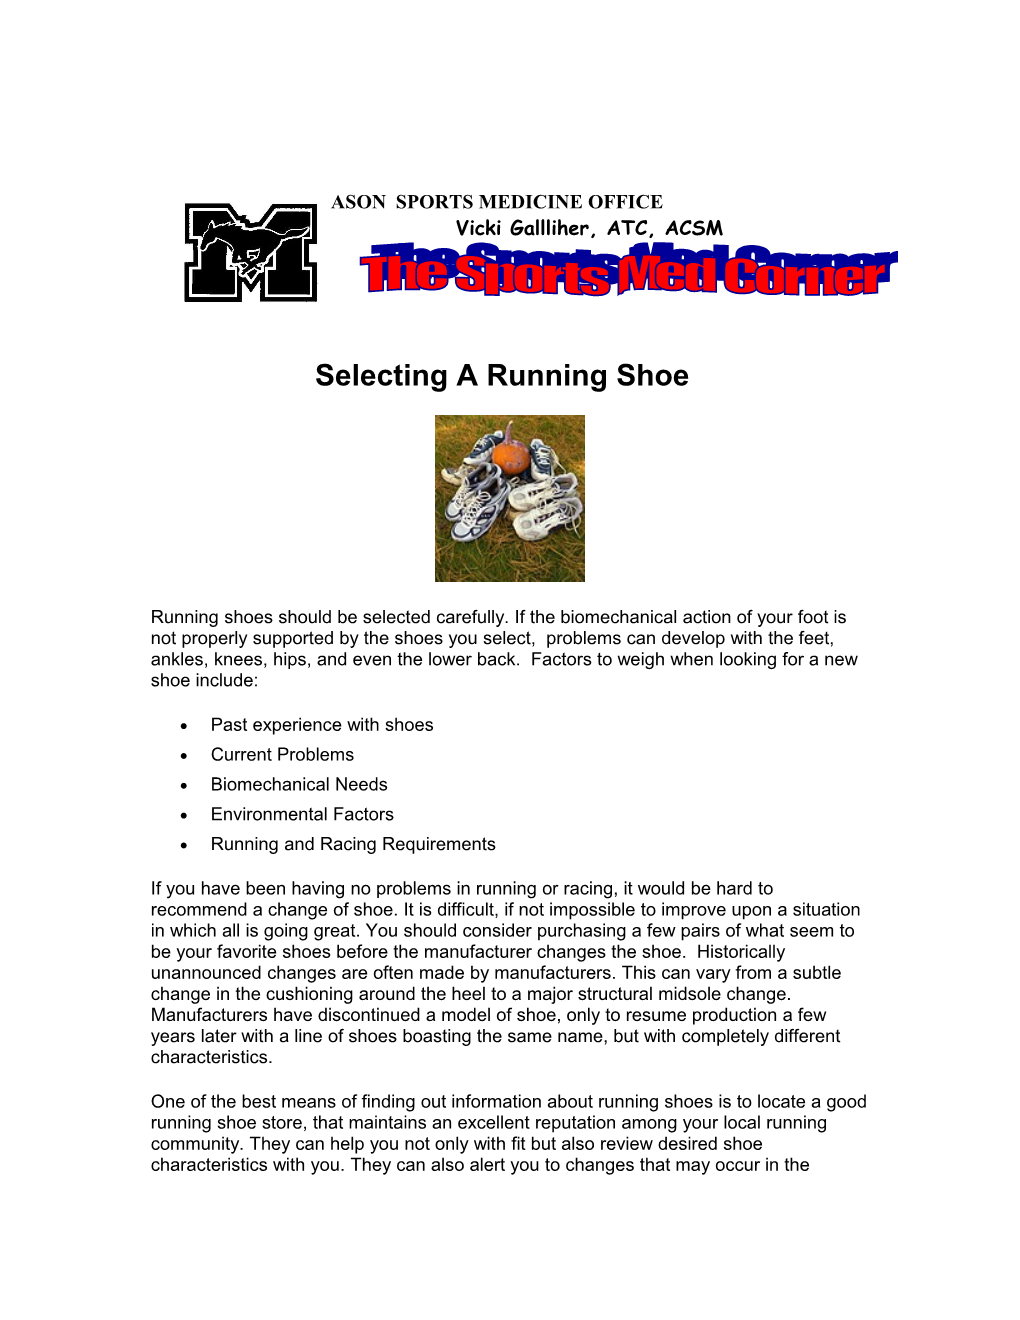 Selecting a Running Shoe